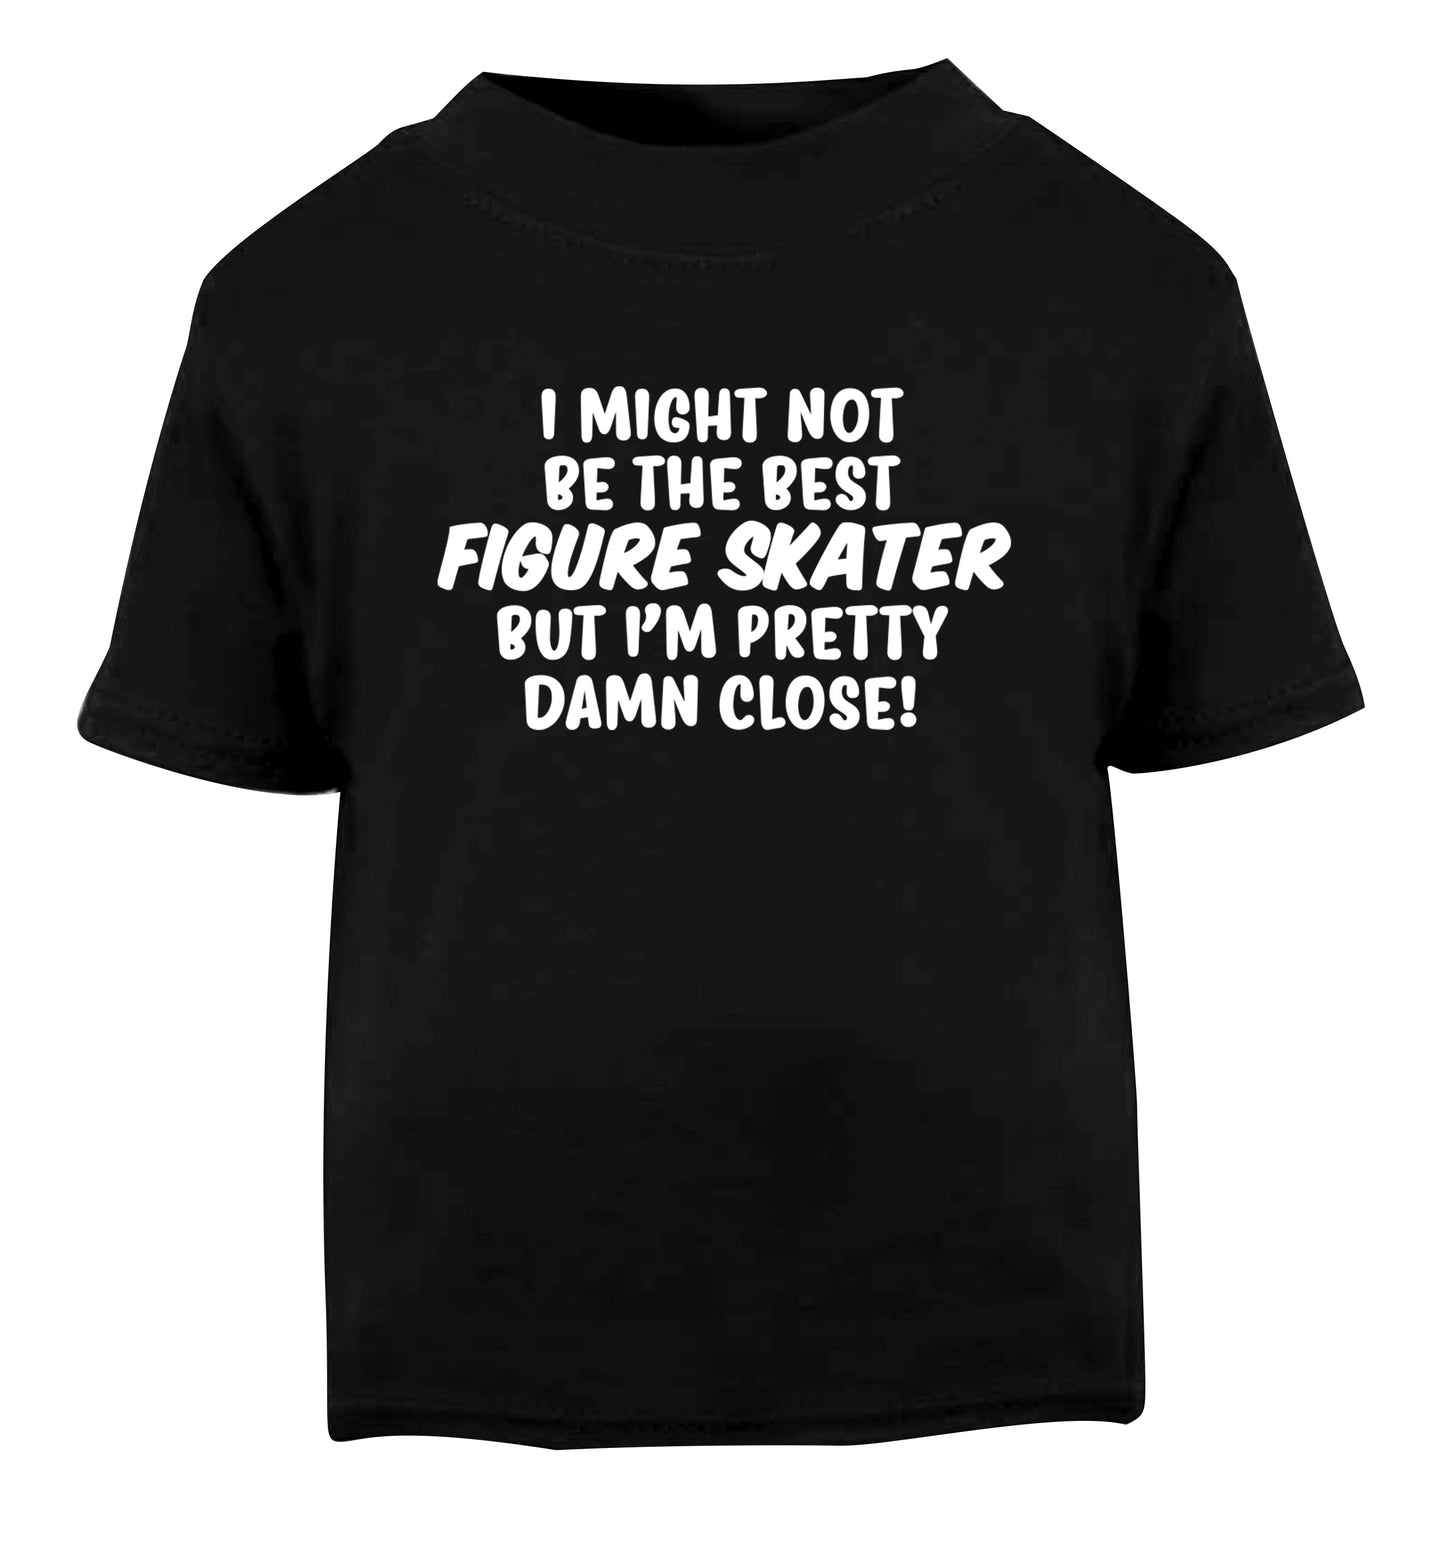 I might not be the best figure skater but I'm pretty damn close! Black Baby Toddler Tshirt 2 years